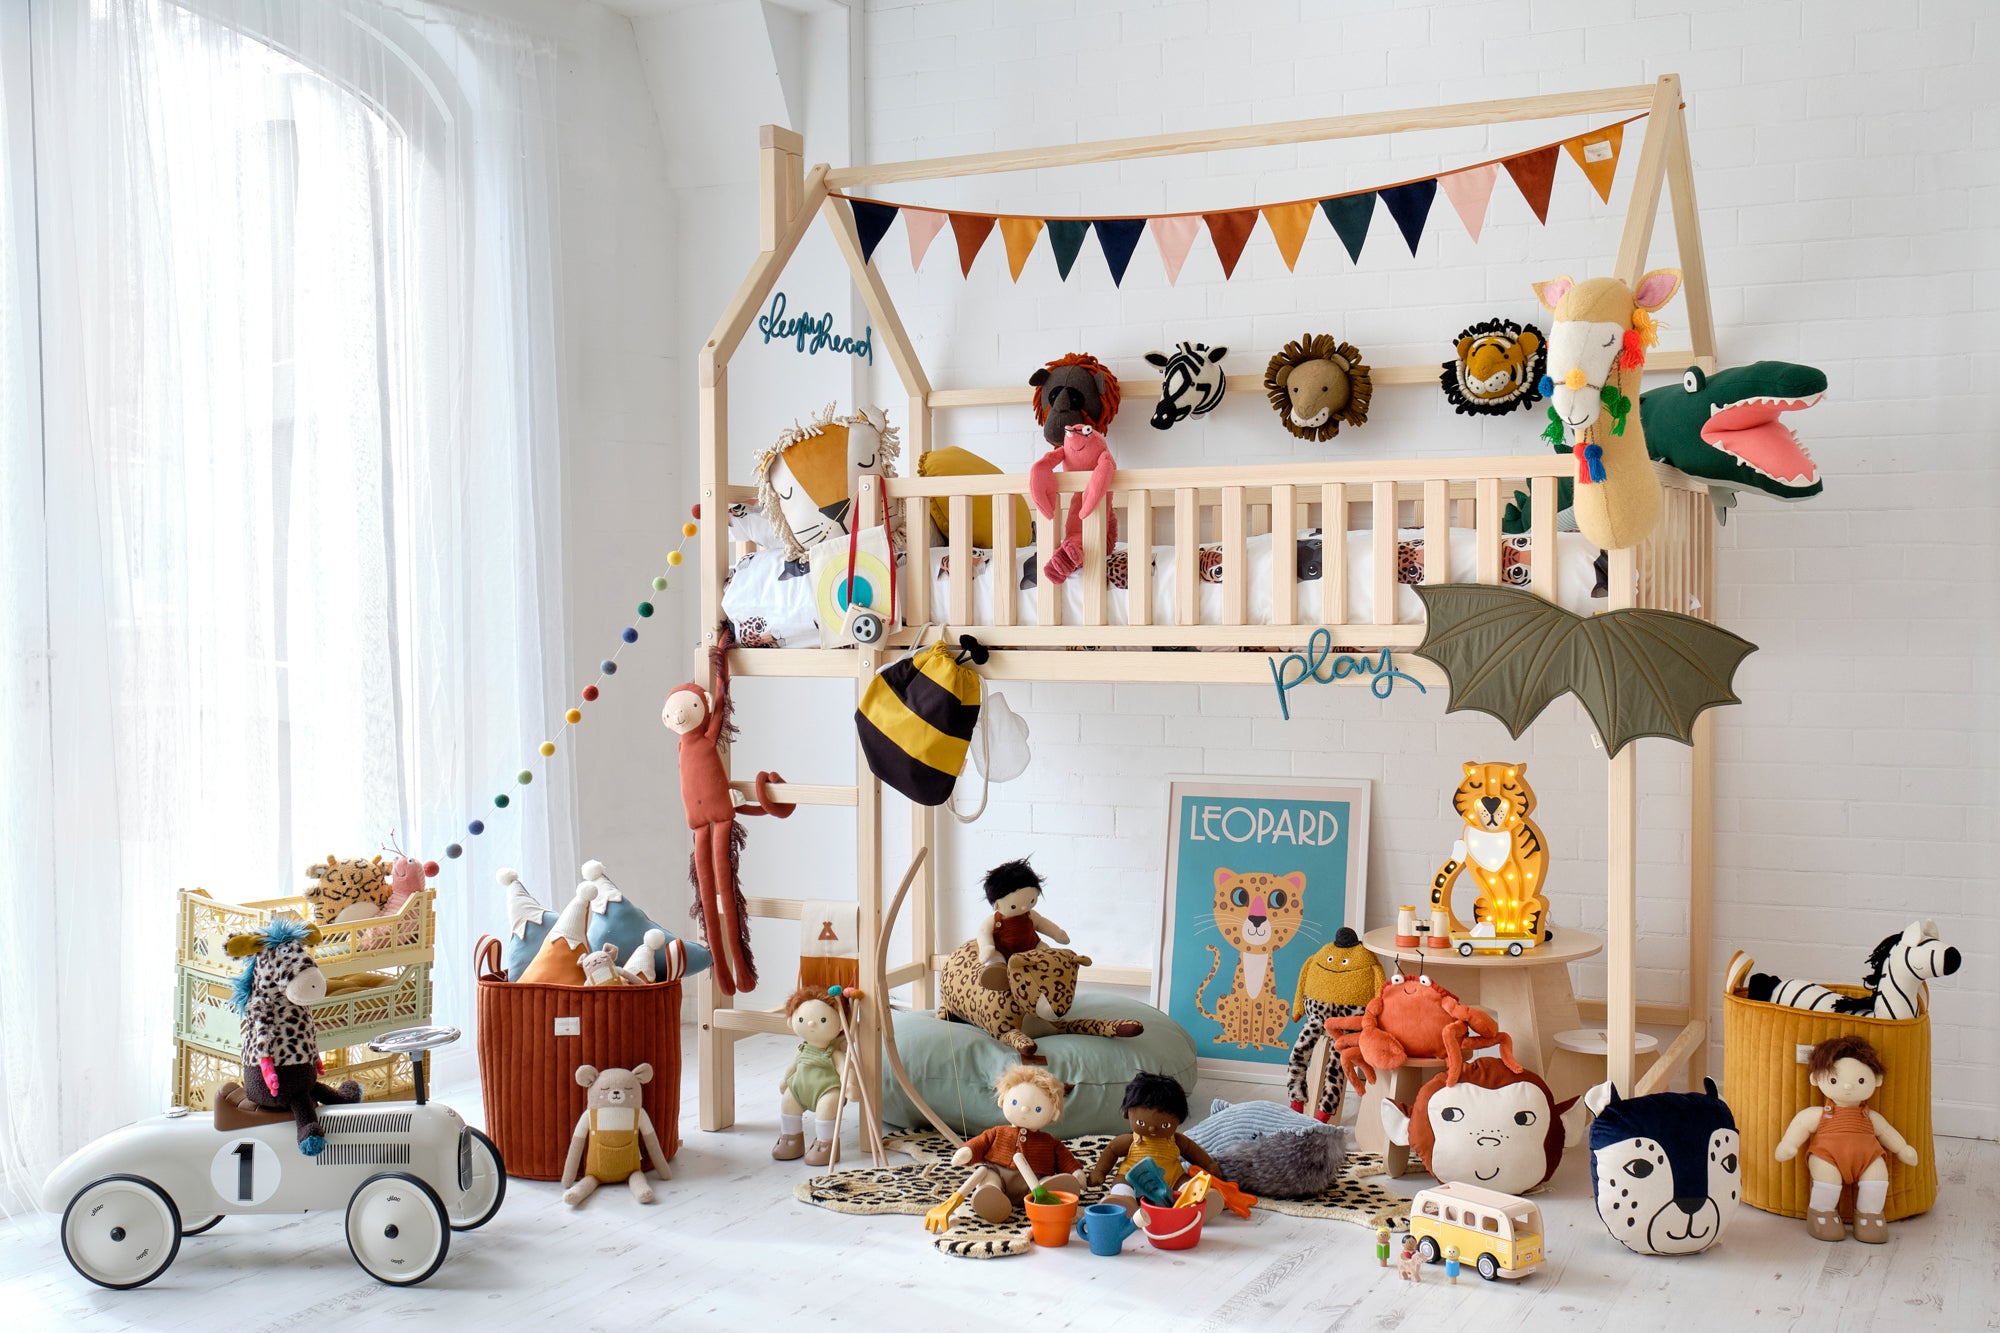 GO WILD WITH OUR MAGICAL COLLECTION OF TOYS AND INTERIORS FOR CHILDREN.